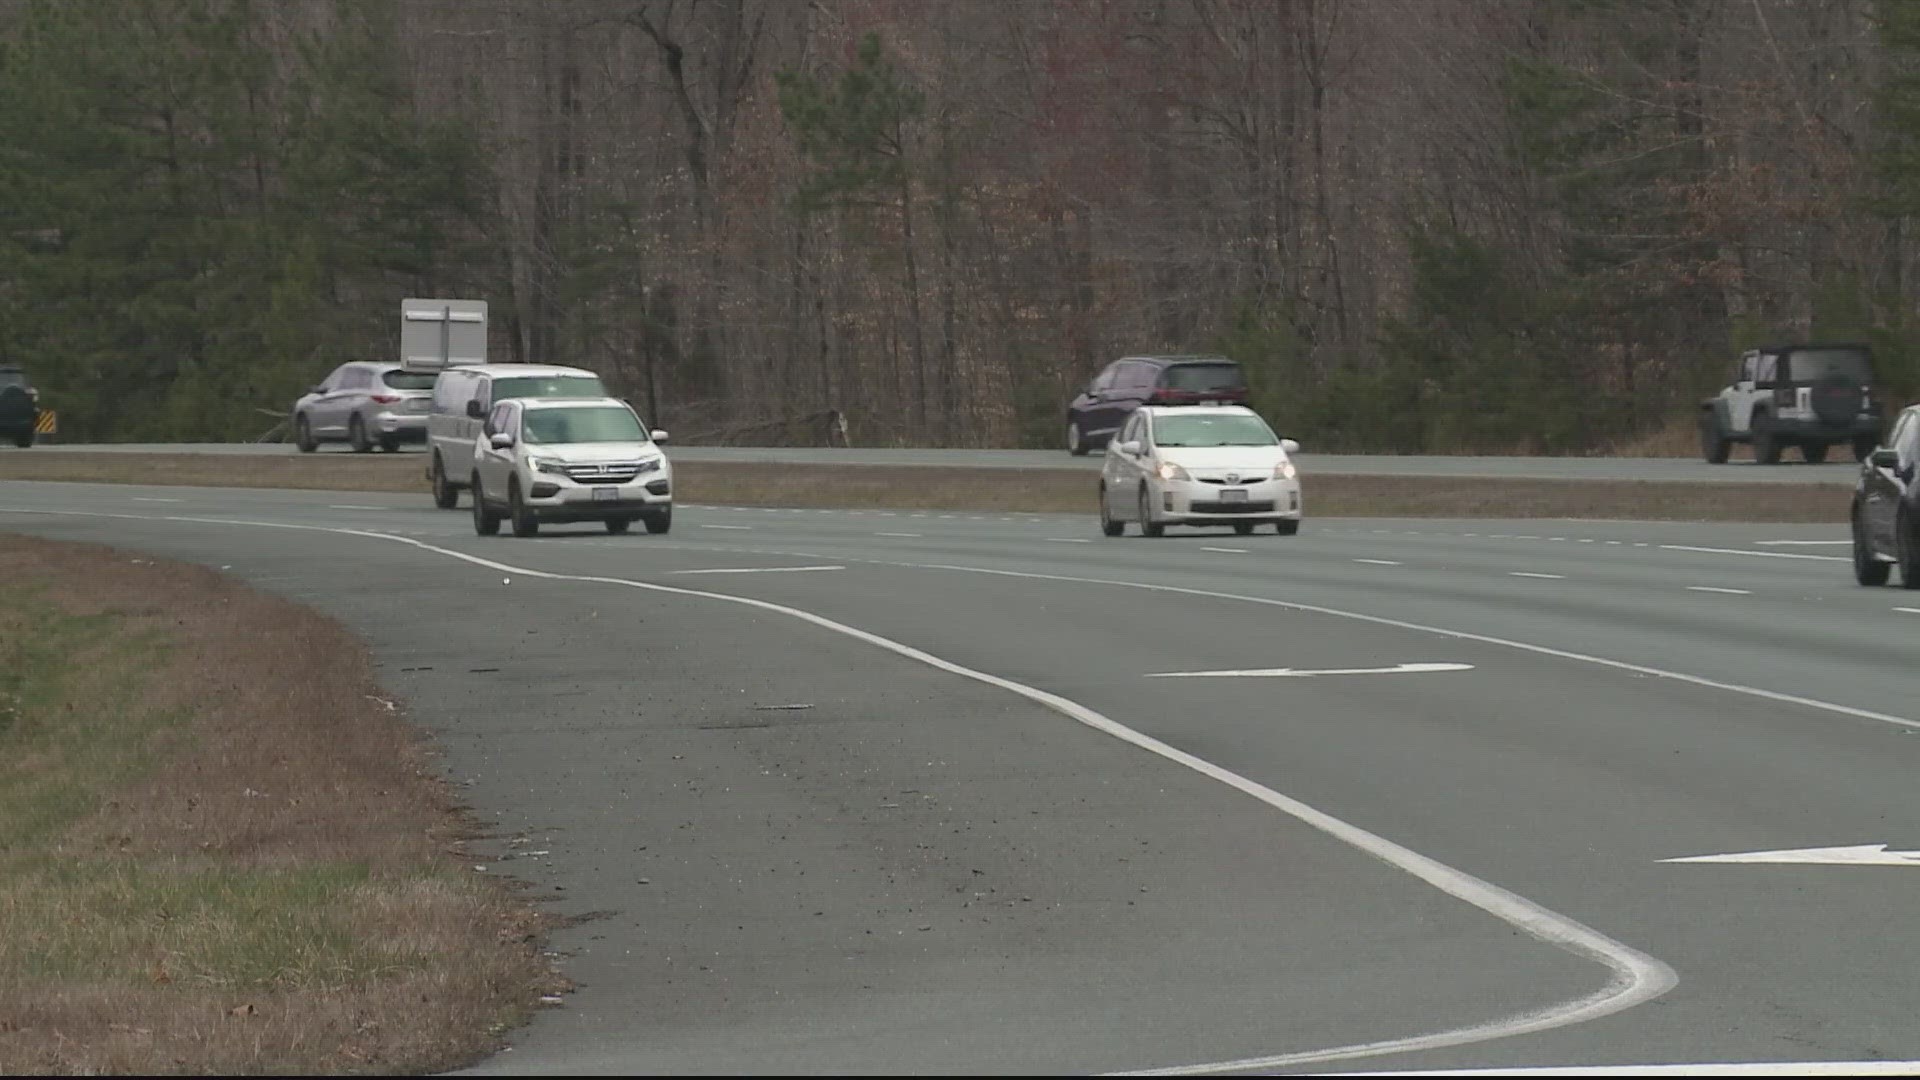 Since March officers have issued nearly 15,000 citations and warnings to try and curb aggressive driving in the county.